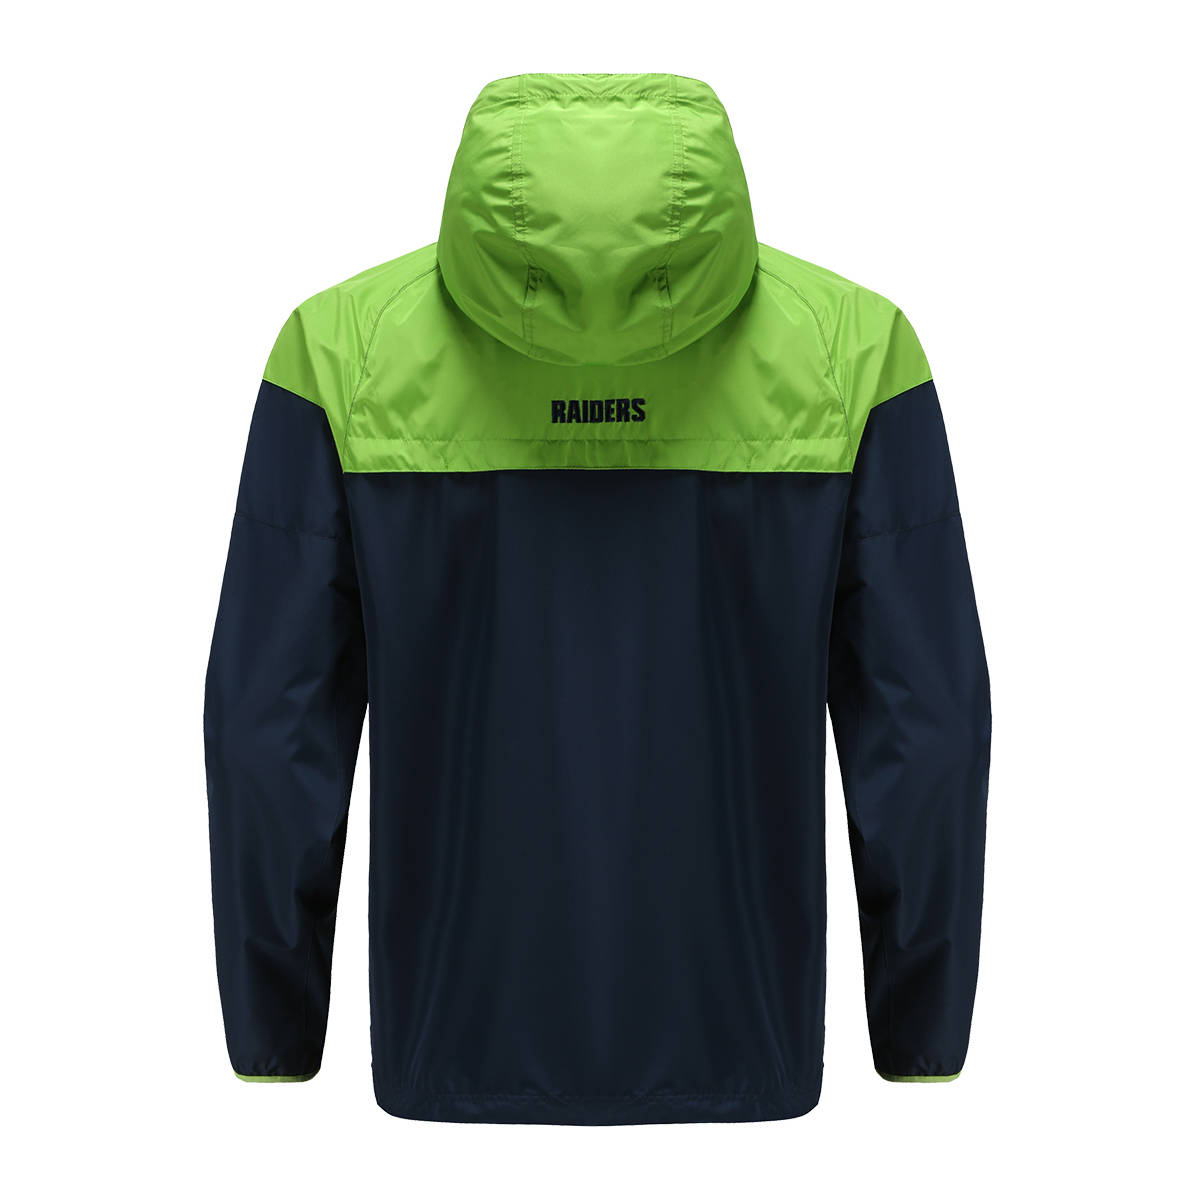 Canberra Raiders Shop – 2021 Adults Wet Weather Jacket